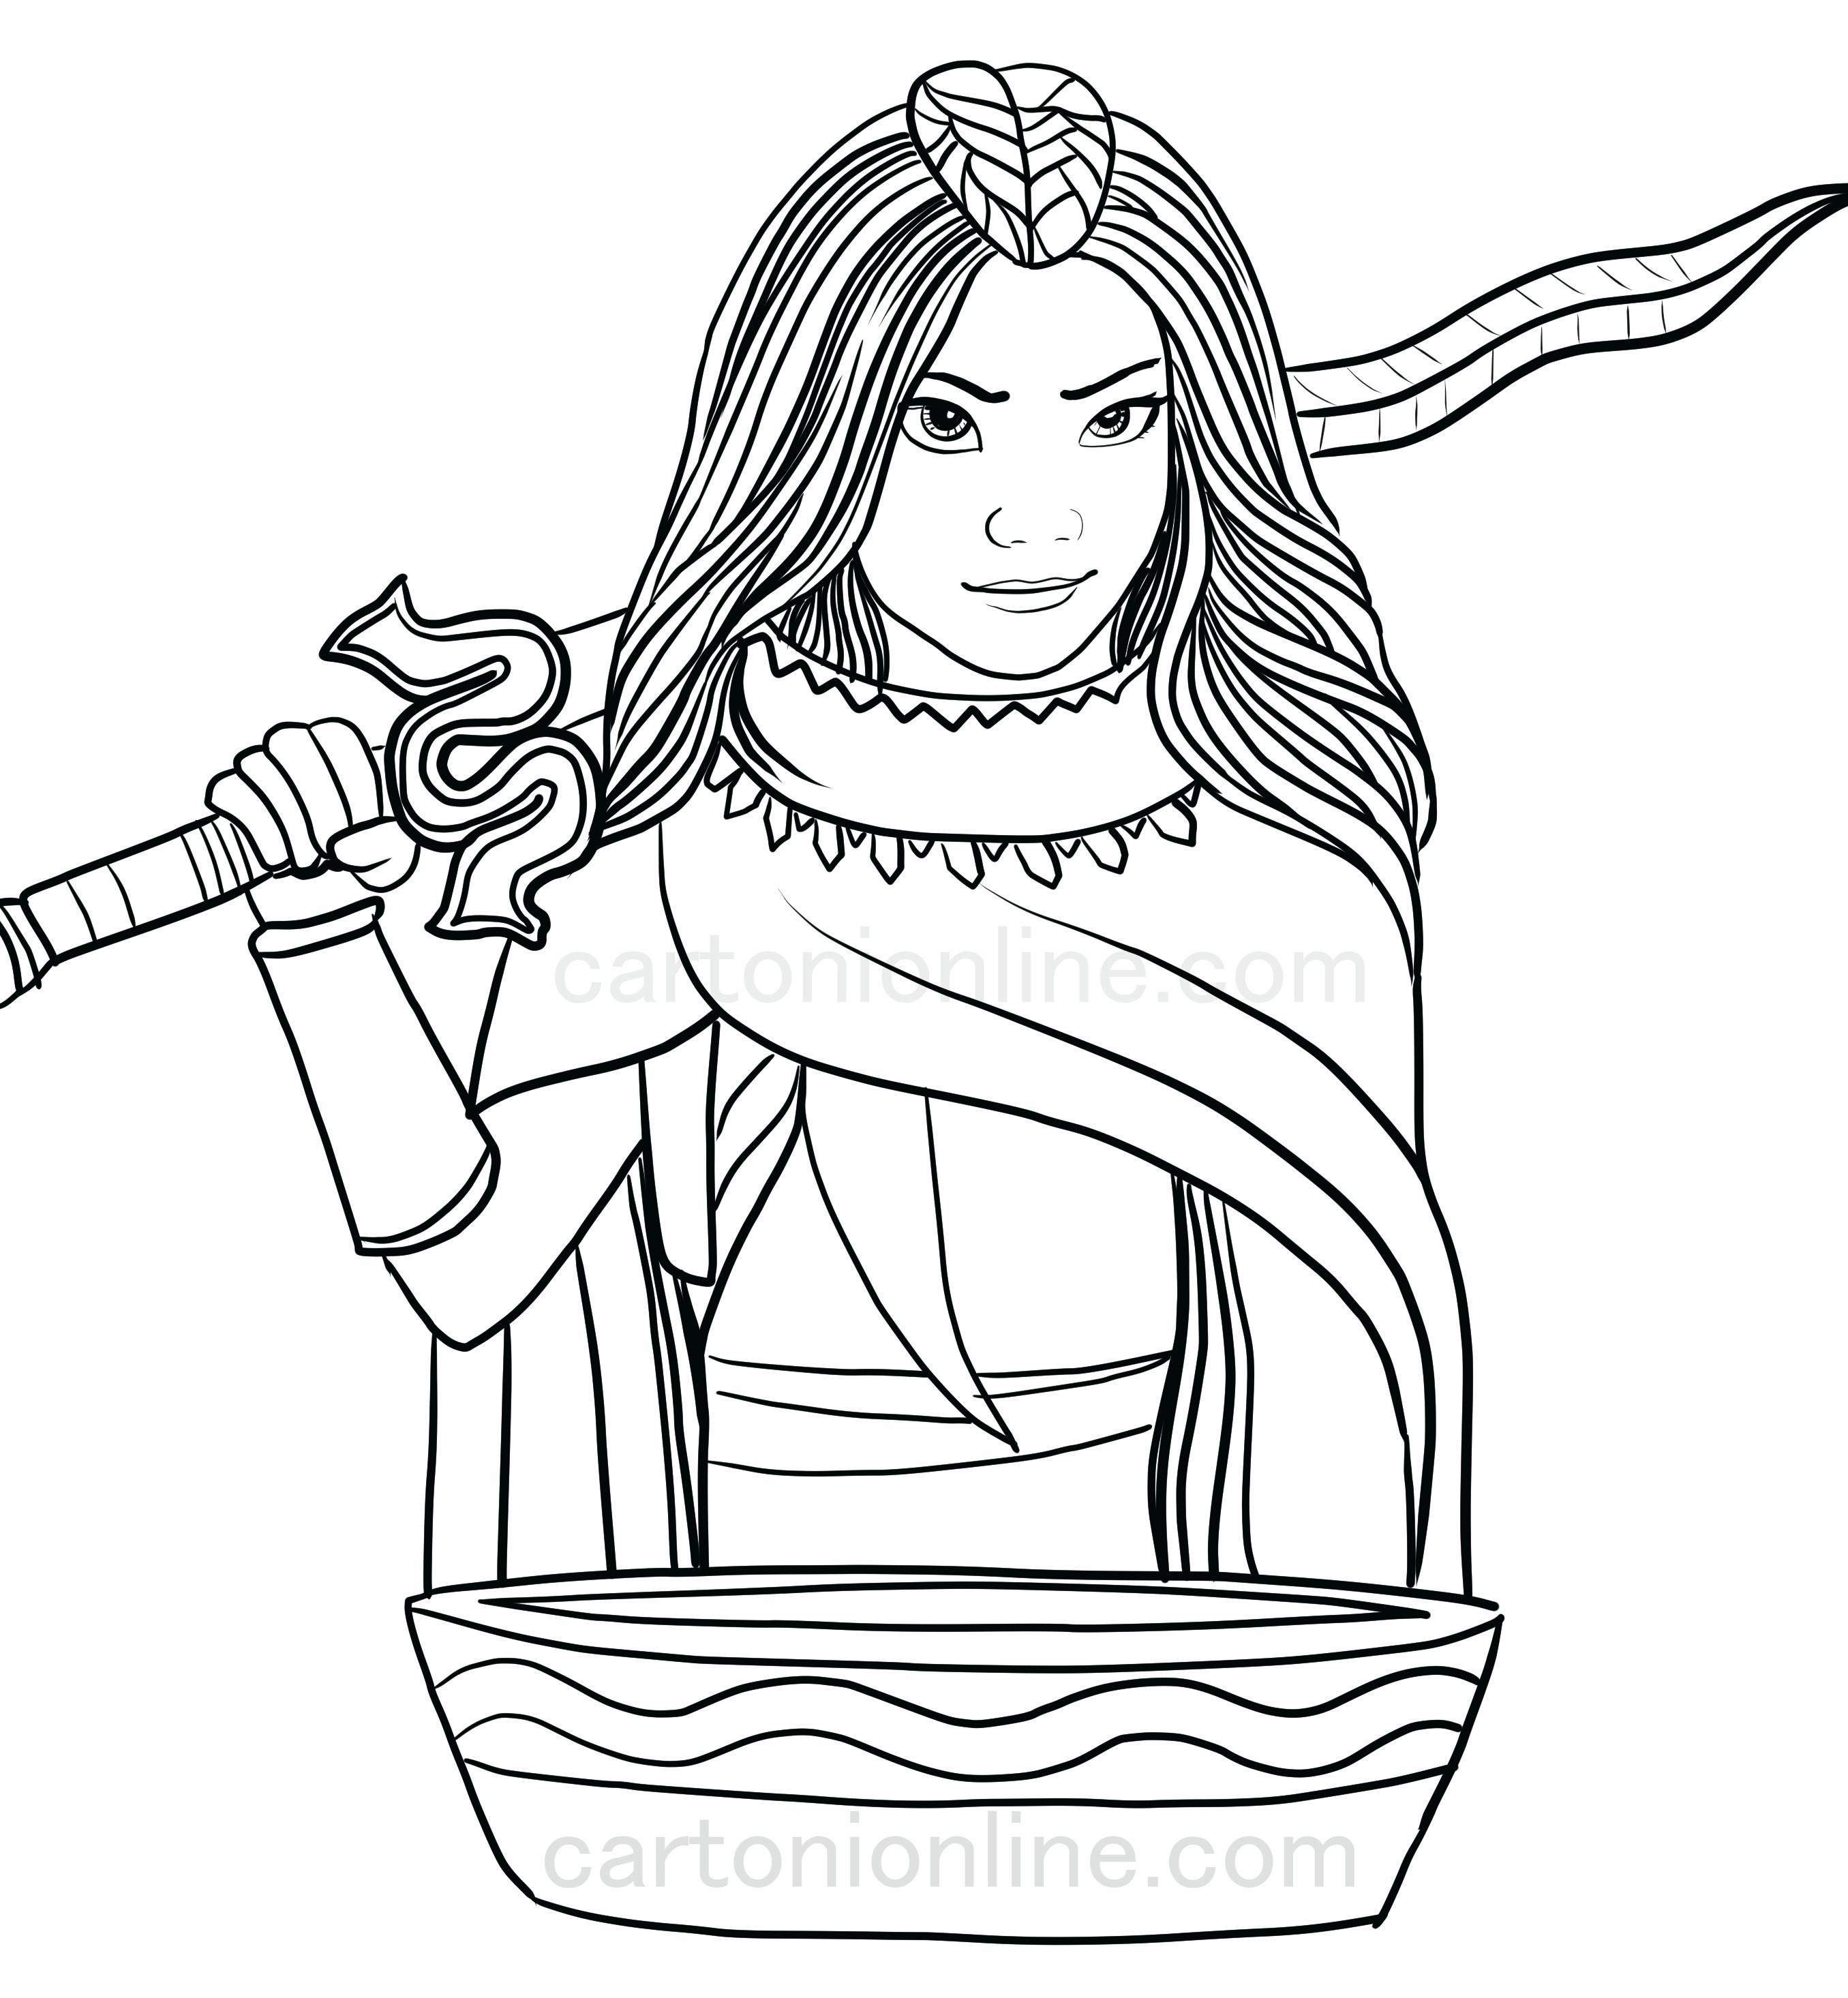 Raya from Raya and the Last Dragon coloring page to print and coloring